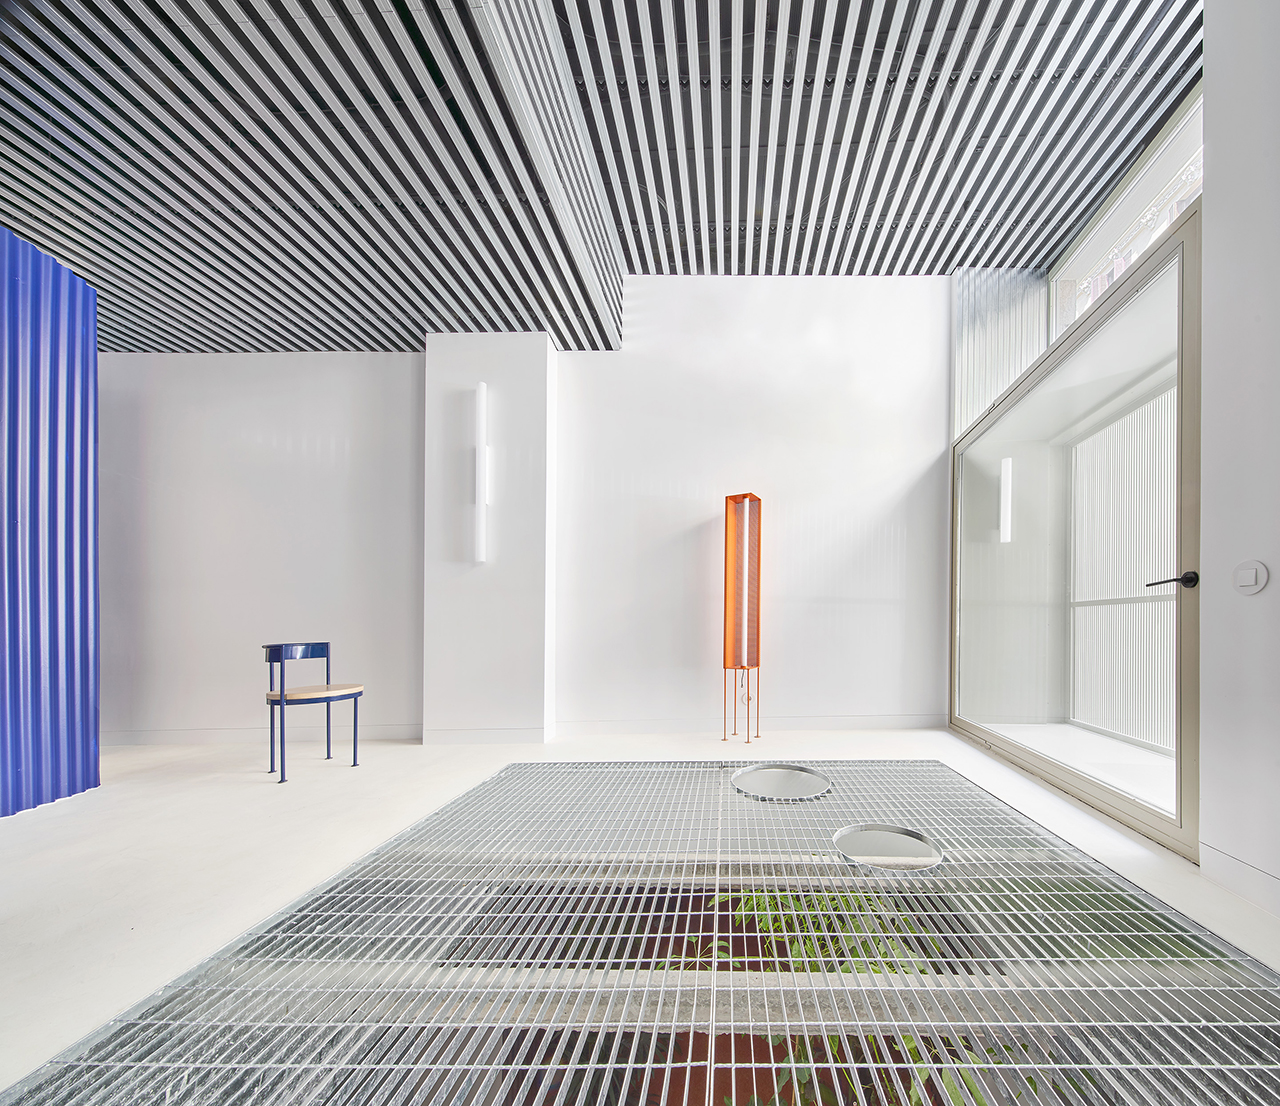 An Otherworldly Duplex Utilizes Color + Materials to Intensify Light